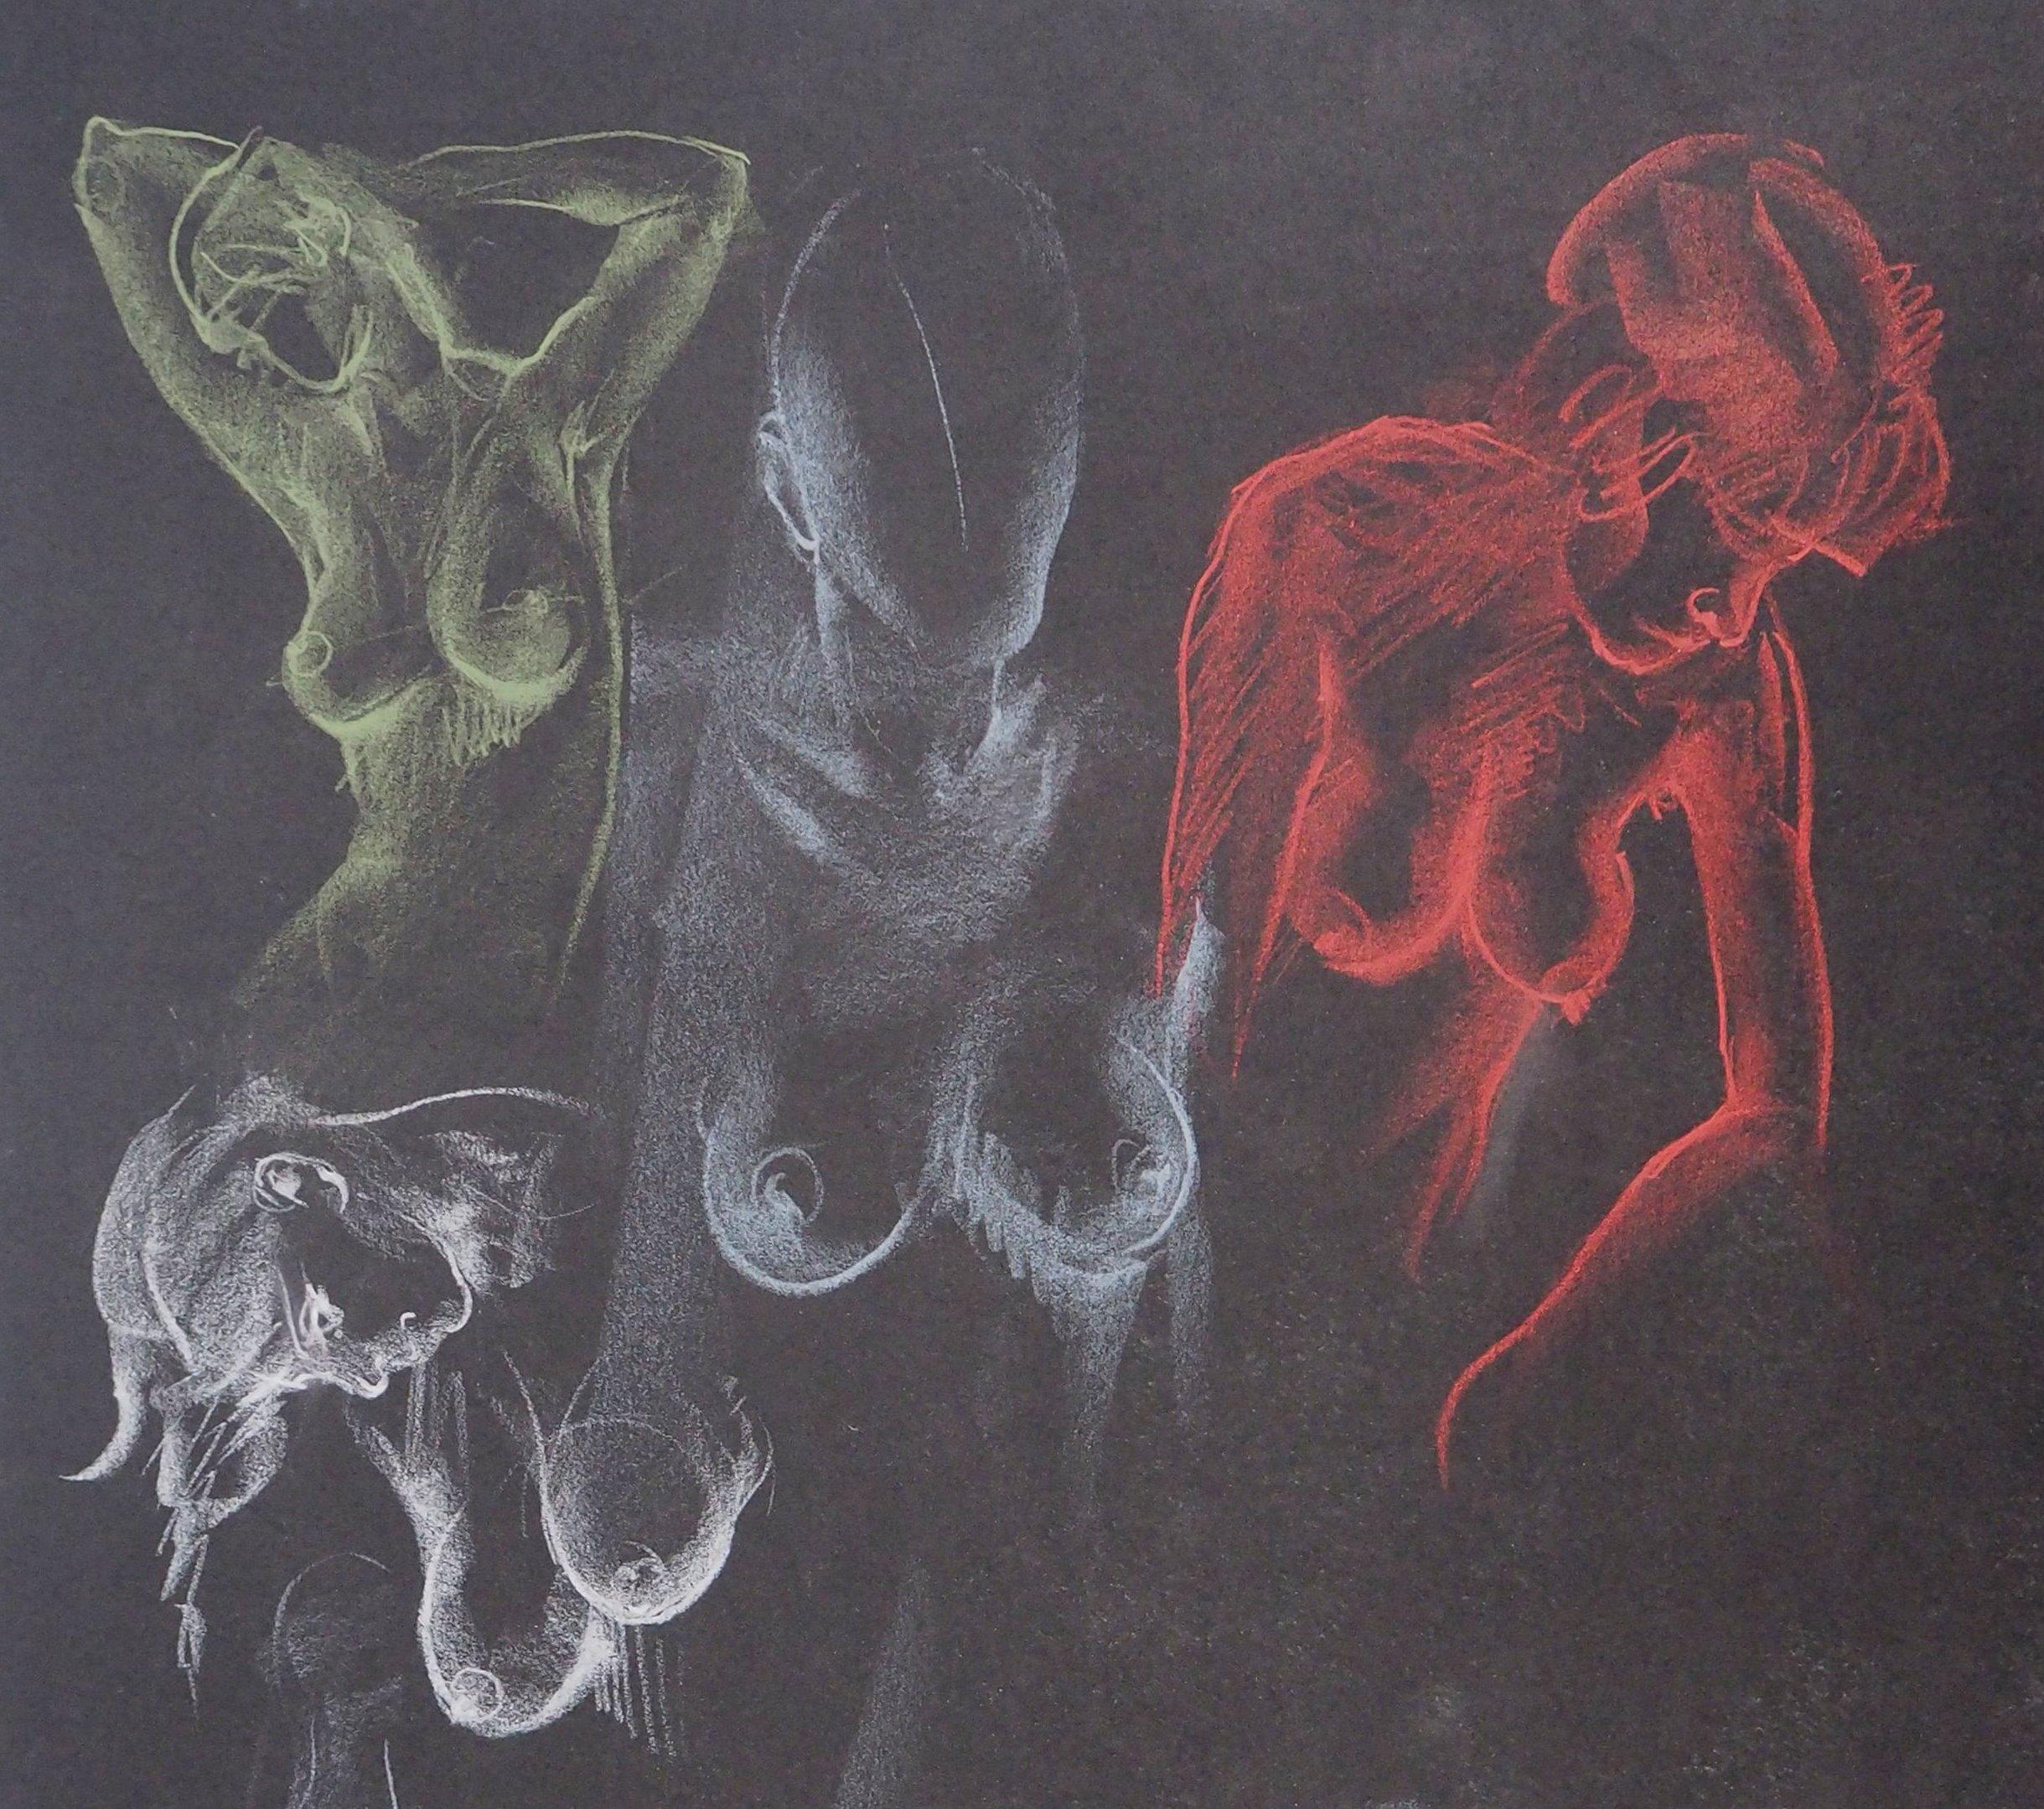 Gaston COPPENS (1909 - 2002)
Natural Beauty, Five Studies of Nude

Original charcoal drawing
Handsigned on the back of the sheet (see photo)
On black paper 65 x 50 cm (c. 25,5 x 19,6 inch)

Very good condition, a few small surface defects on the